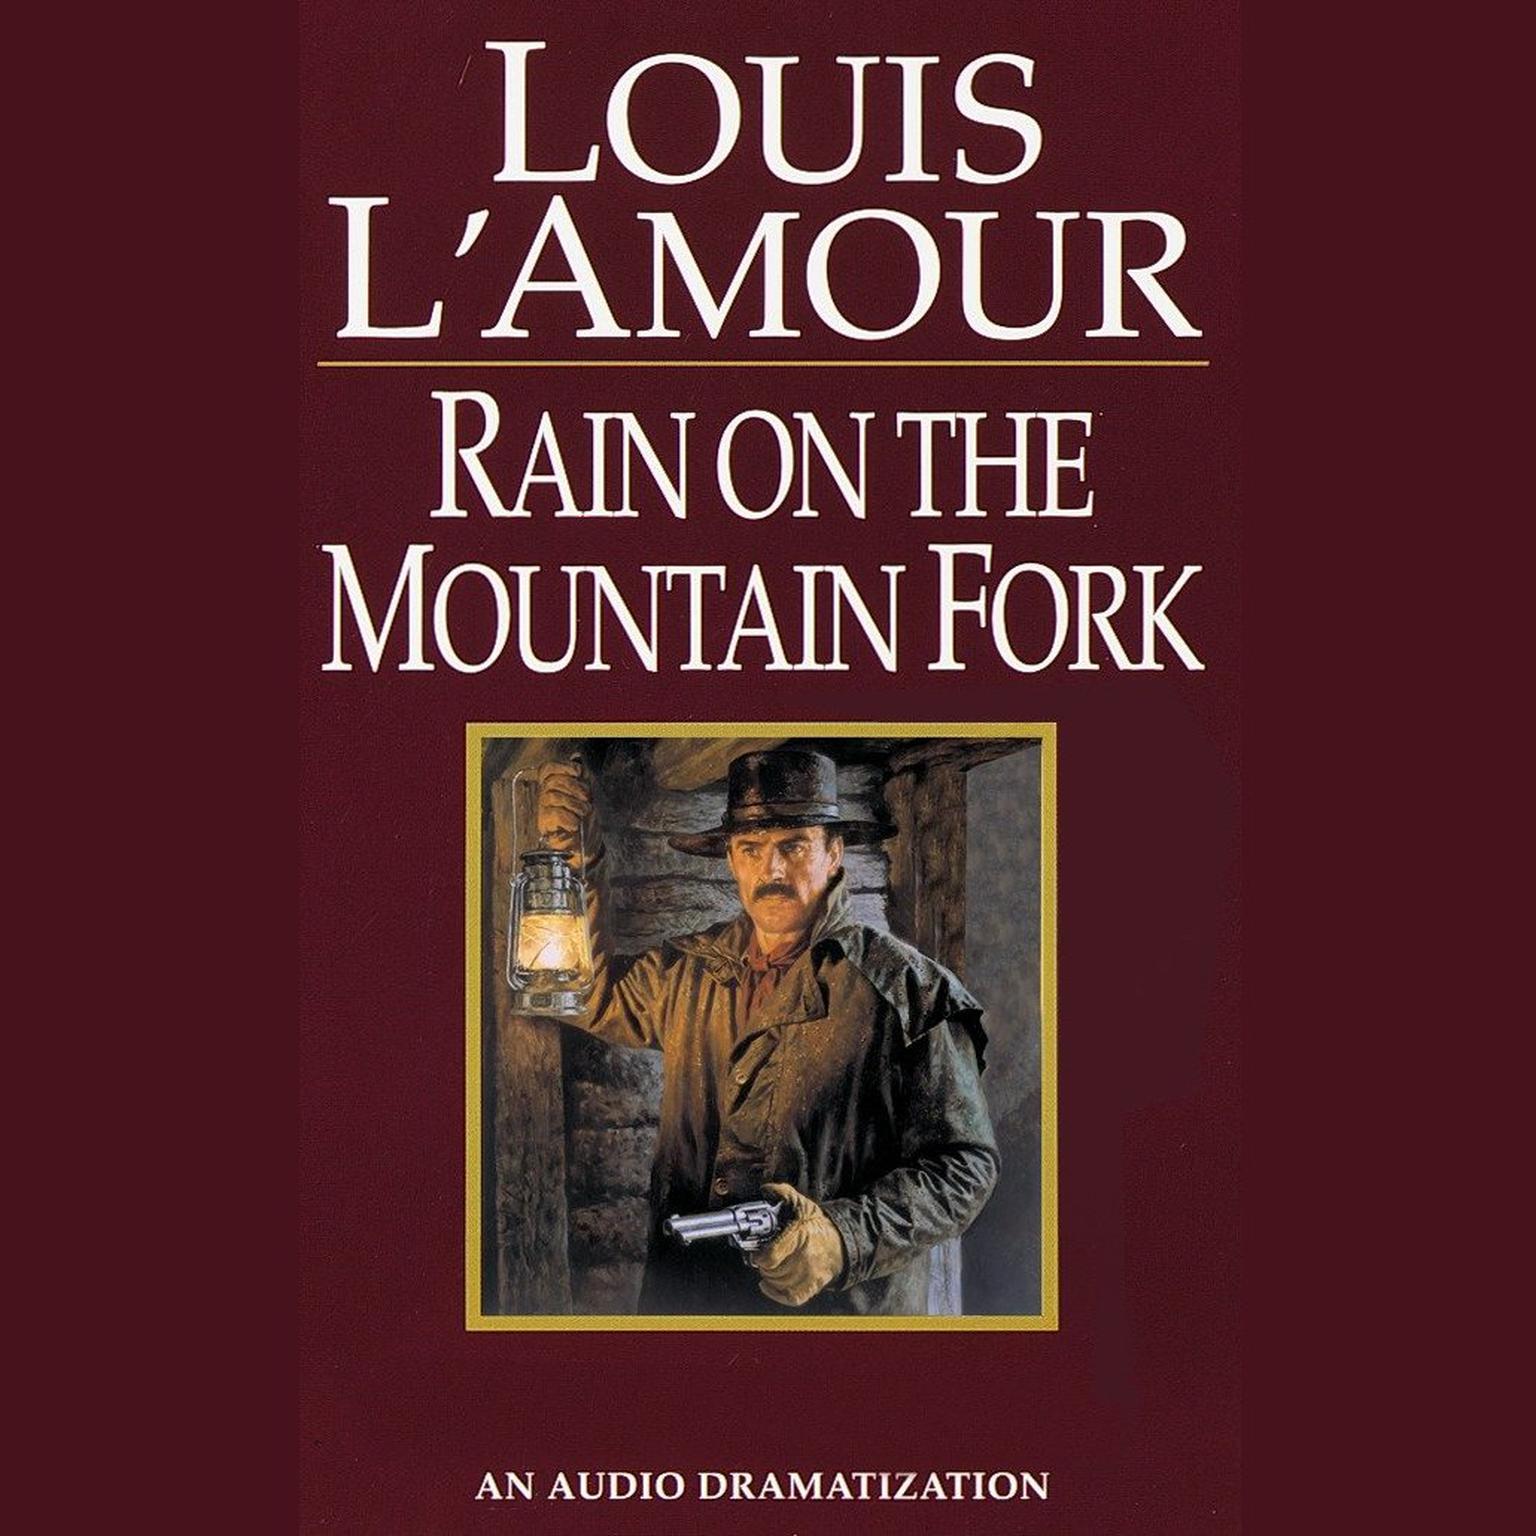 Rain on the Mountain Fork Audiobook, by Louis L’Amour